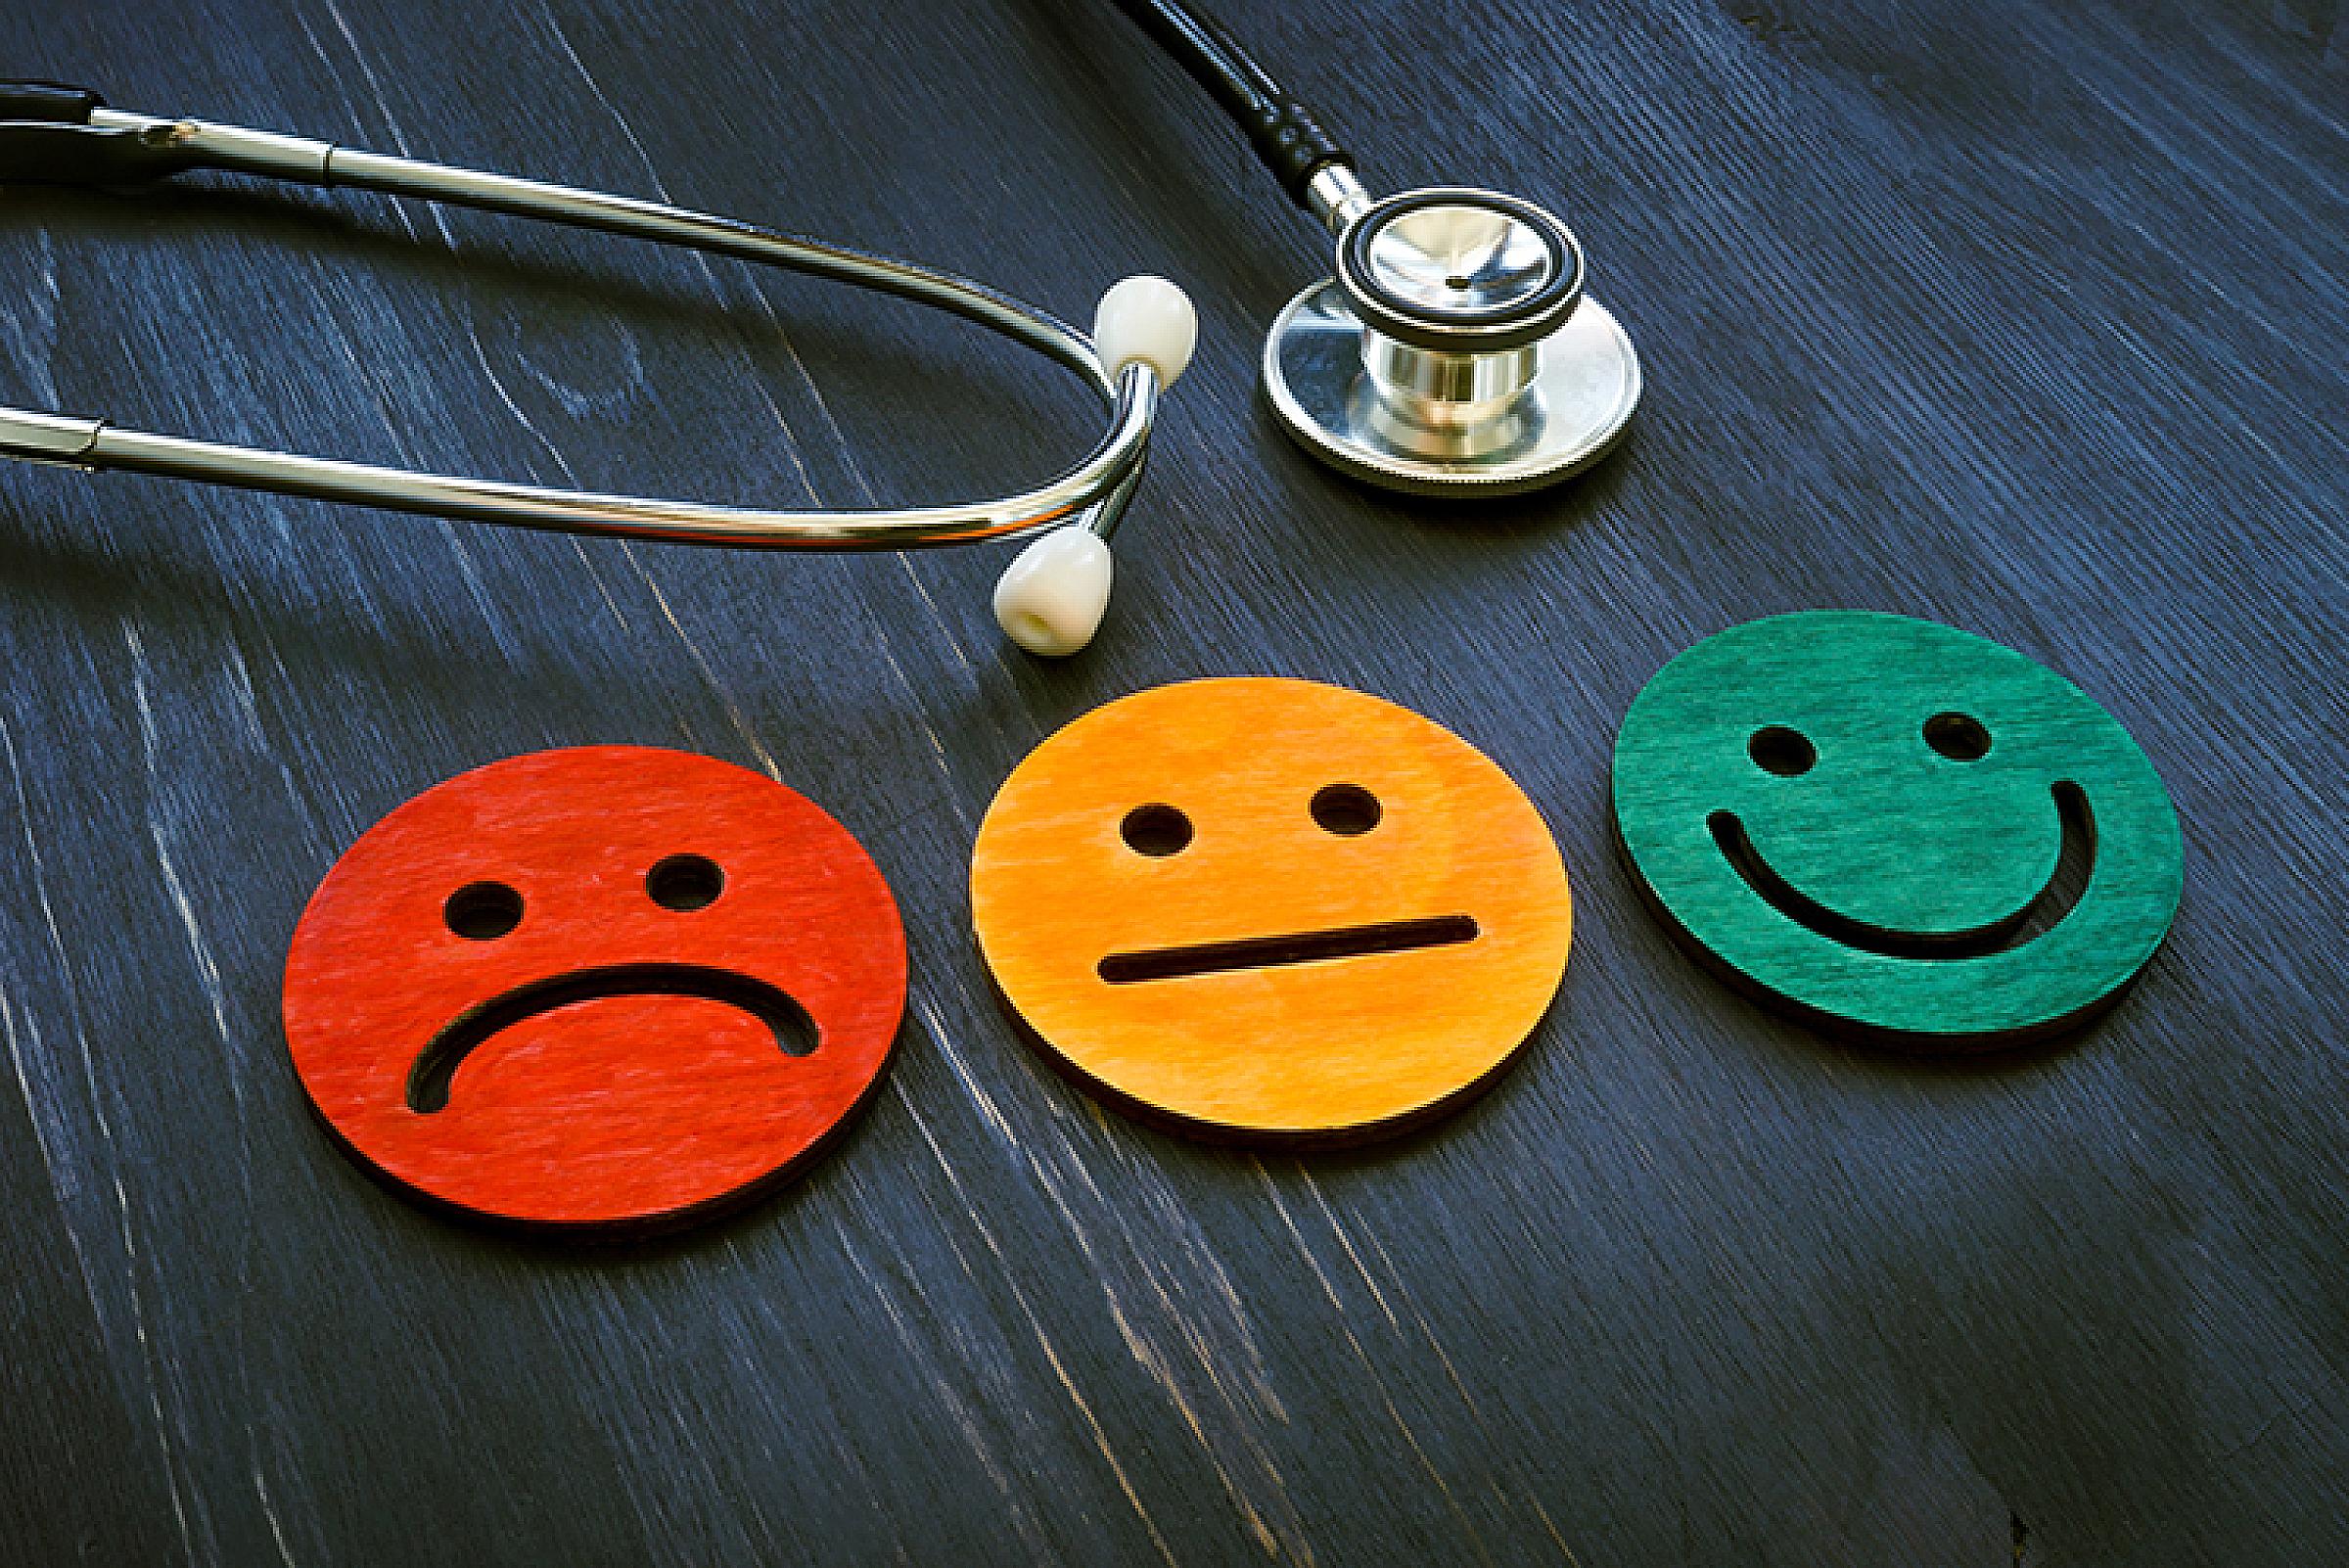 Red disk with frowning face, yellow disk with neutral face, and green disk with smiling face on a table next to a stethoscope